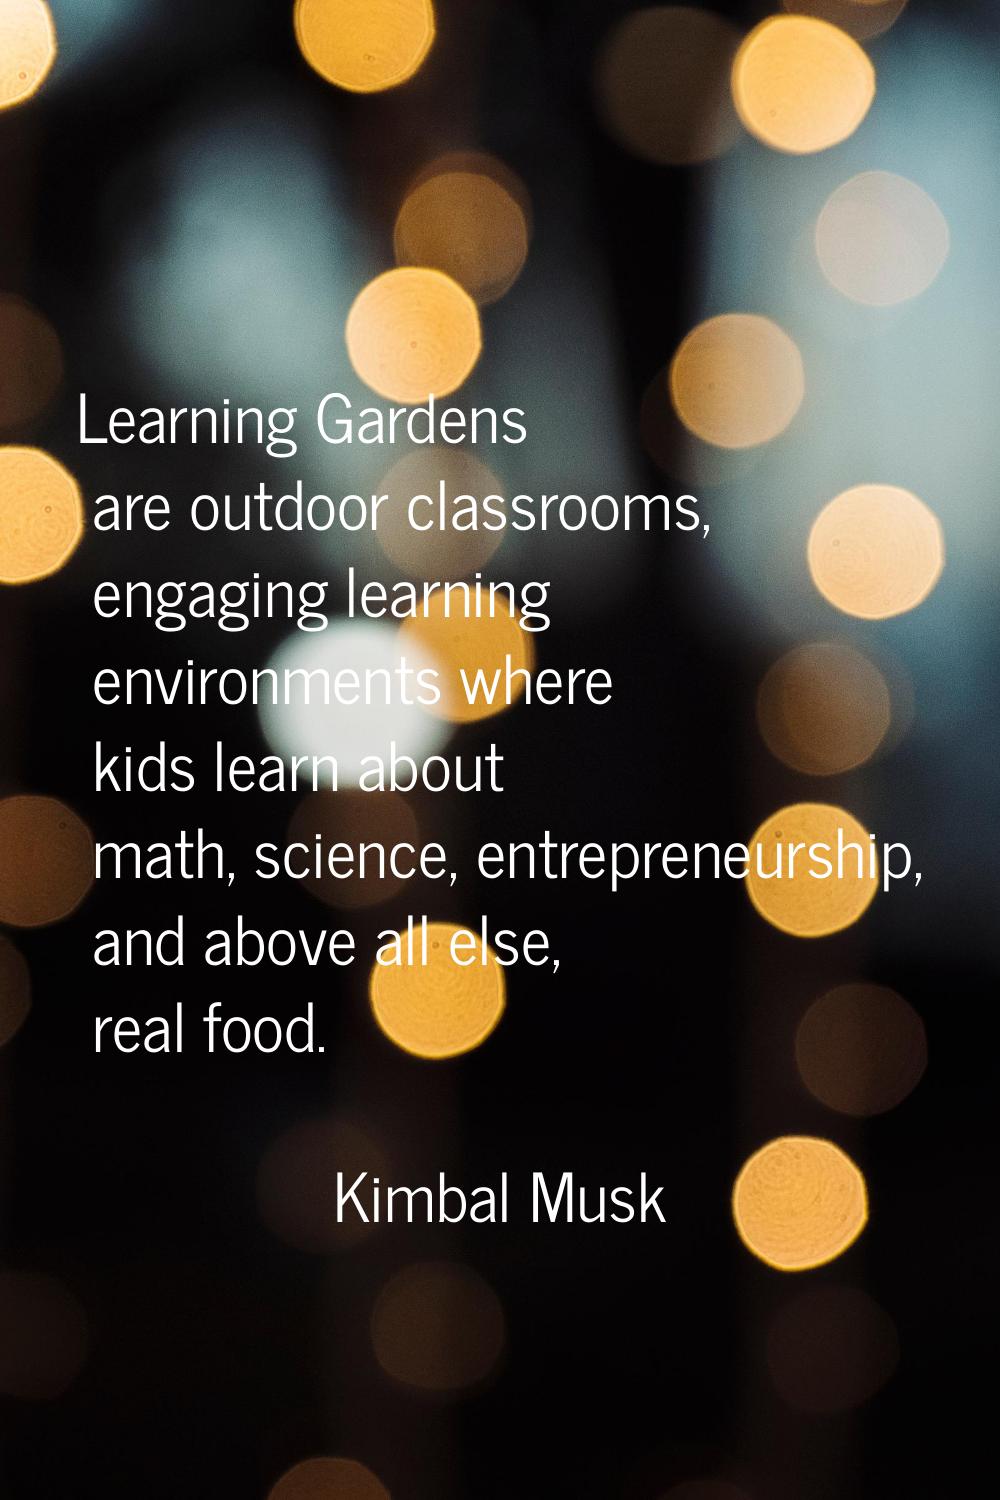 Learning Gardens are outdoor classrooms, engaging learning environments where kids learn about math